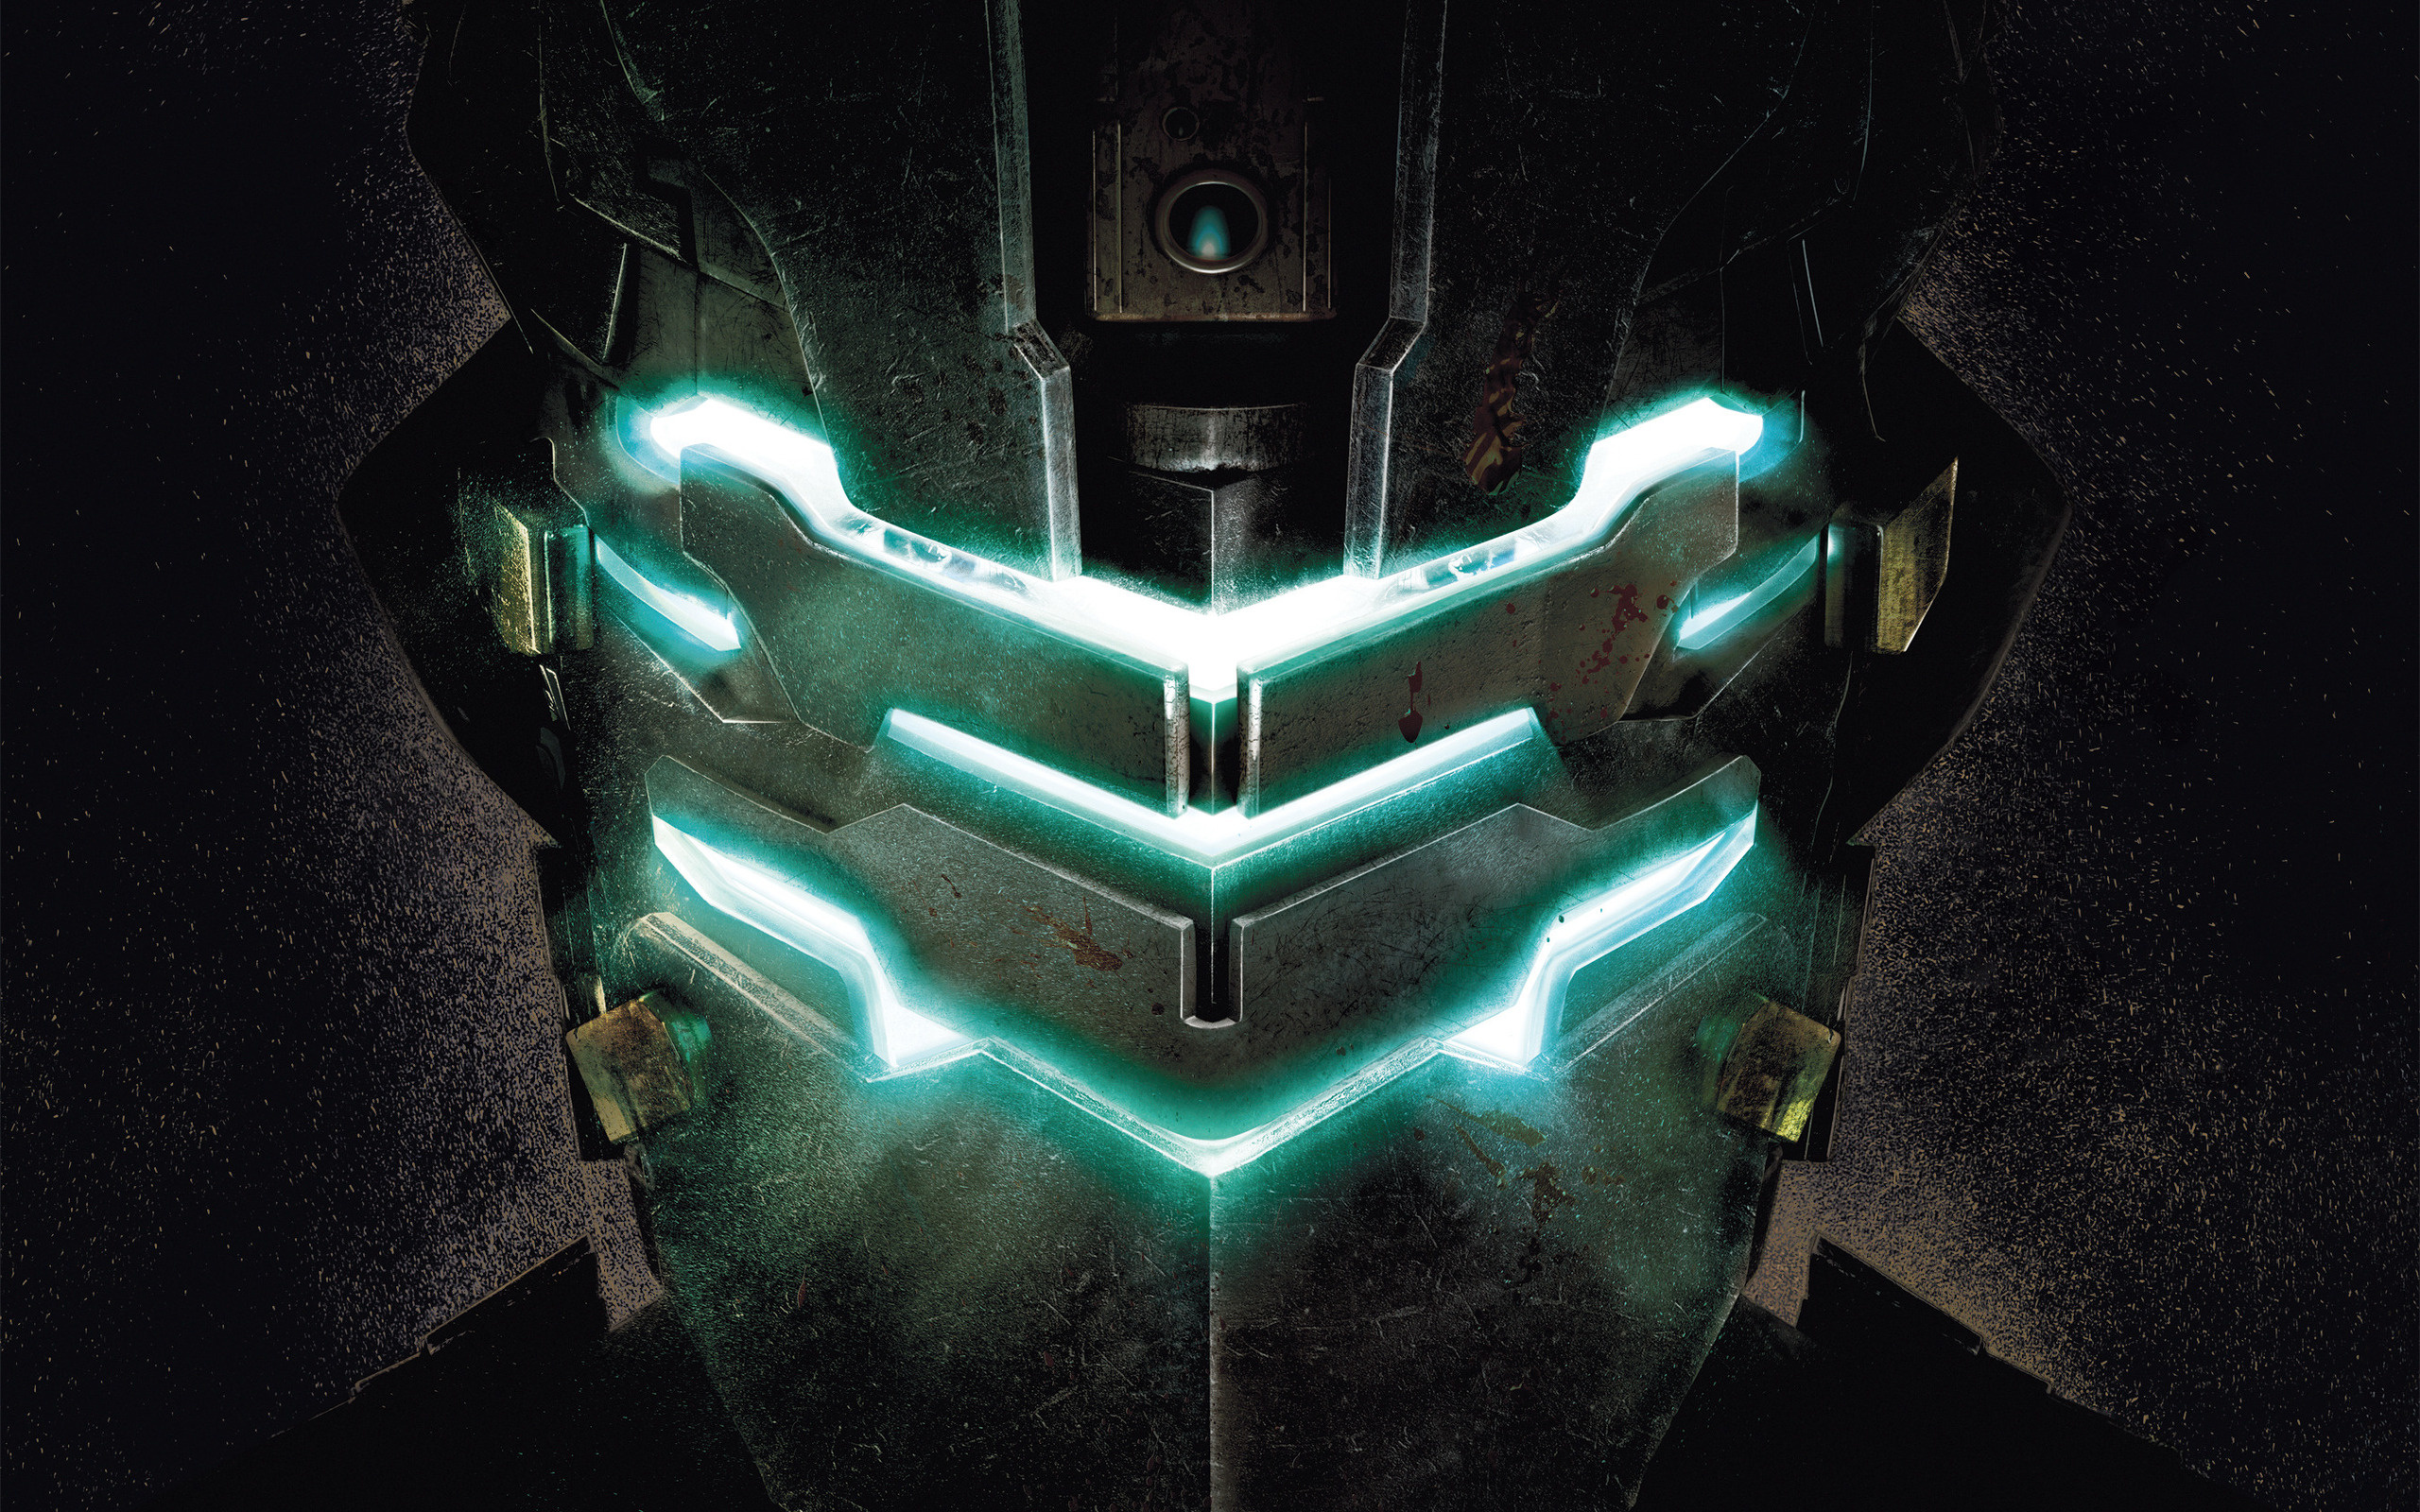 dead space, video game, dead space 2 lock screen backgrounds